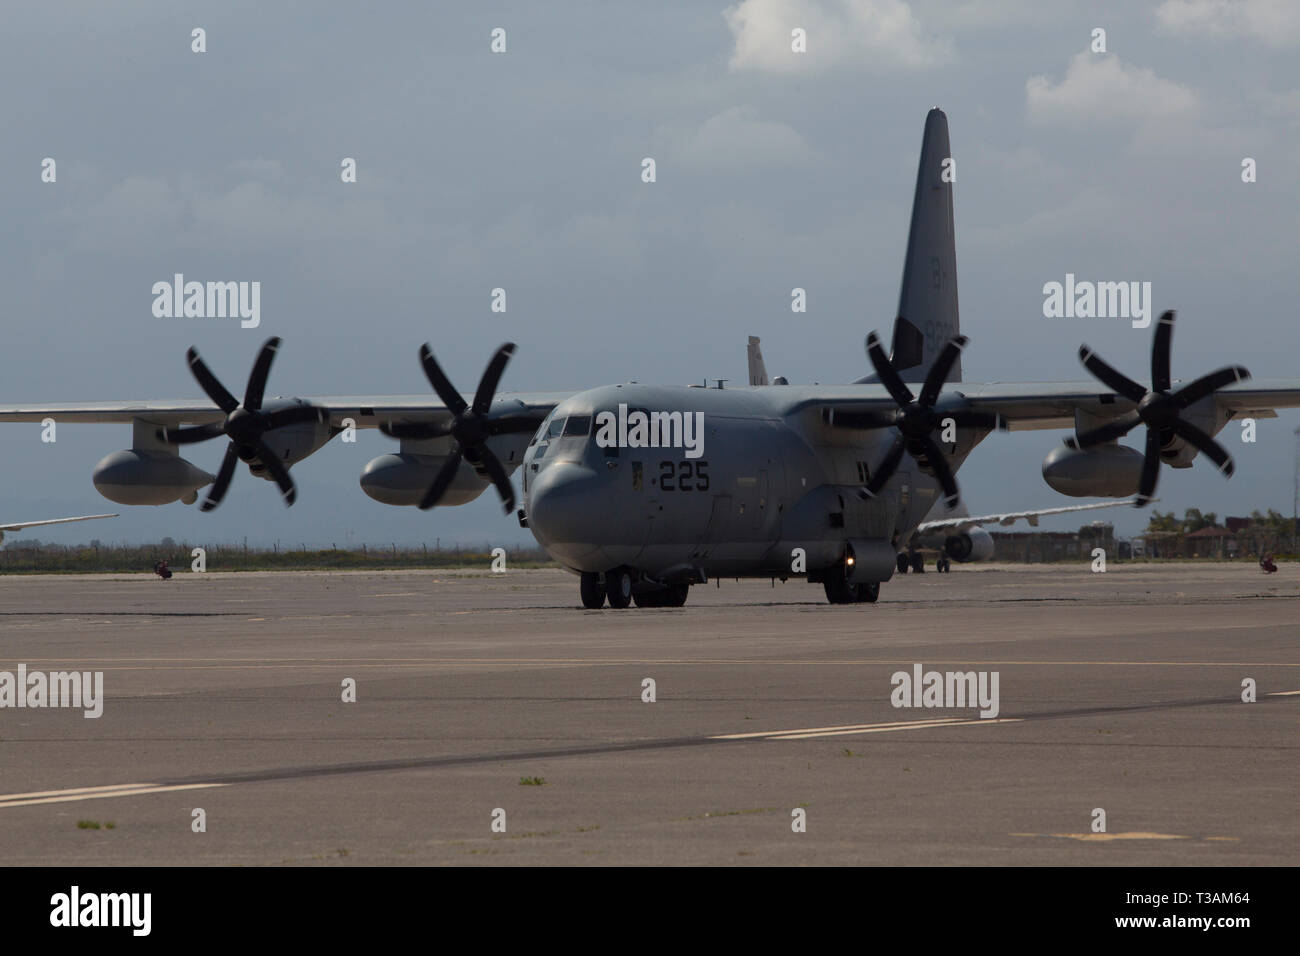 A U.S. Marine Corps KC-130J Super Hercules taxis at Naval Air Station Sigonella, Italy, April 6, 2019. The aircraft transported Marines and equipment with the aviation combat element for Special Purpose Marine Air-Ground Task Force-Crisis Response-Africa 19.2, Marine Forces Europe and Africa. SPMAGTF-CR-AF provides an autonomous, self-deploying, and highly mobile crisis response force to U.S. AFRICOM. The aircraft is with Marine Aerial Refueler Transport Squadron 252. (U.S. Marine Corps photo by Staff Sgt. Mark E Morrow Jr) Stock Photo